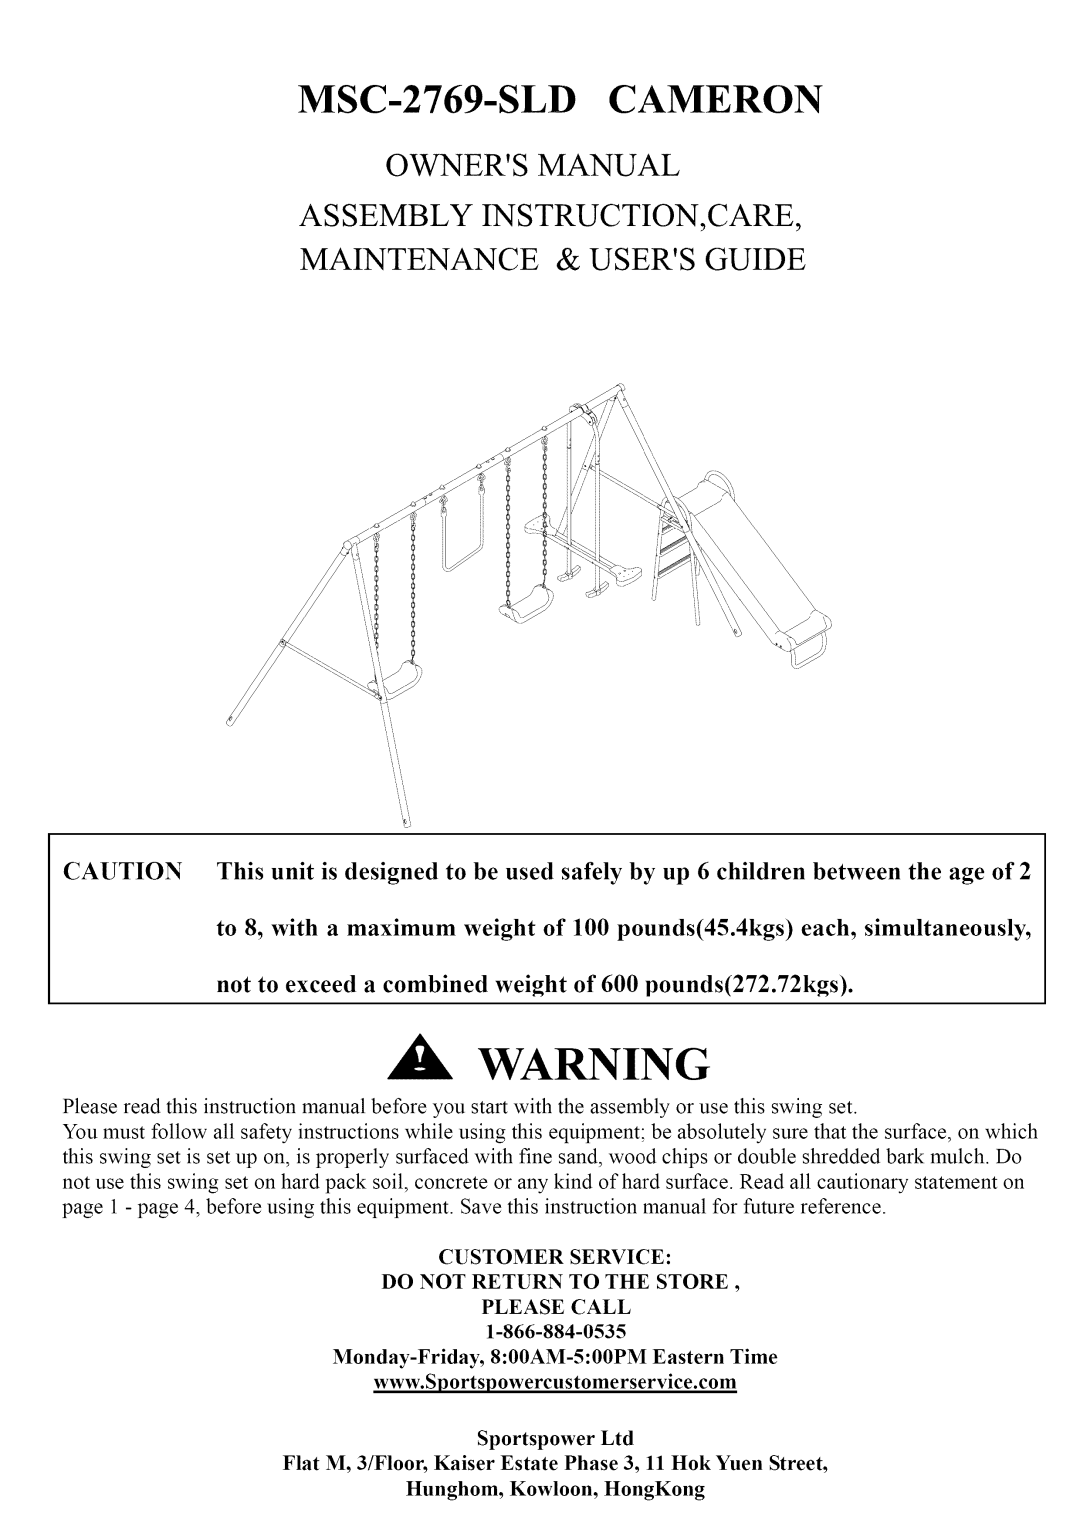 Camerons Products owner manual Maintenance & Users Guide, MSC-2769-SLD CAMERON 